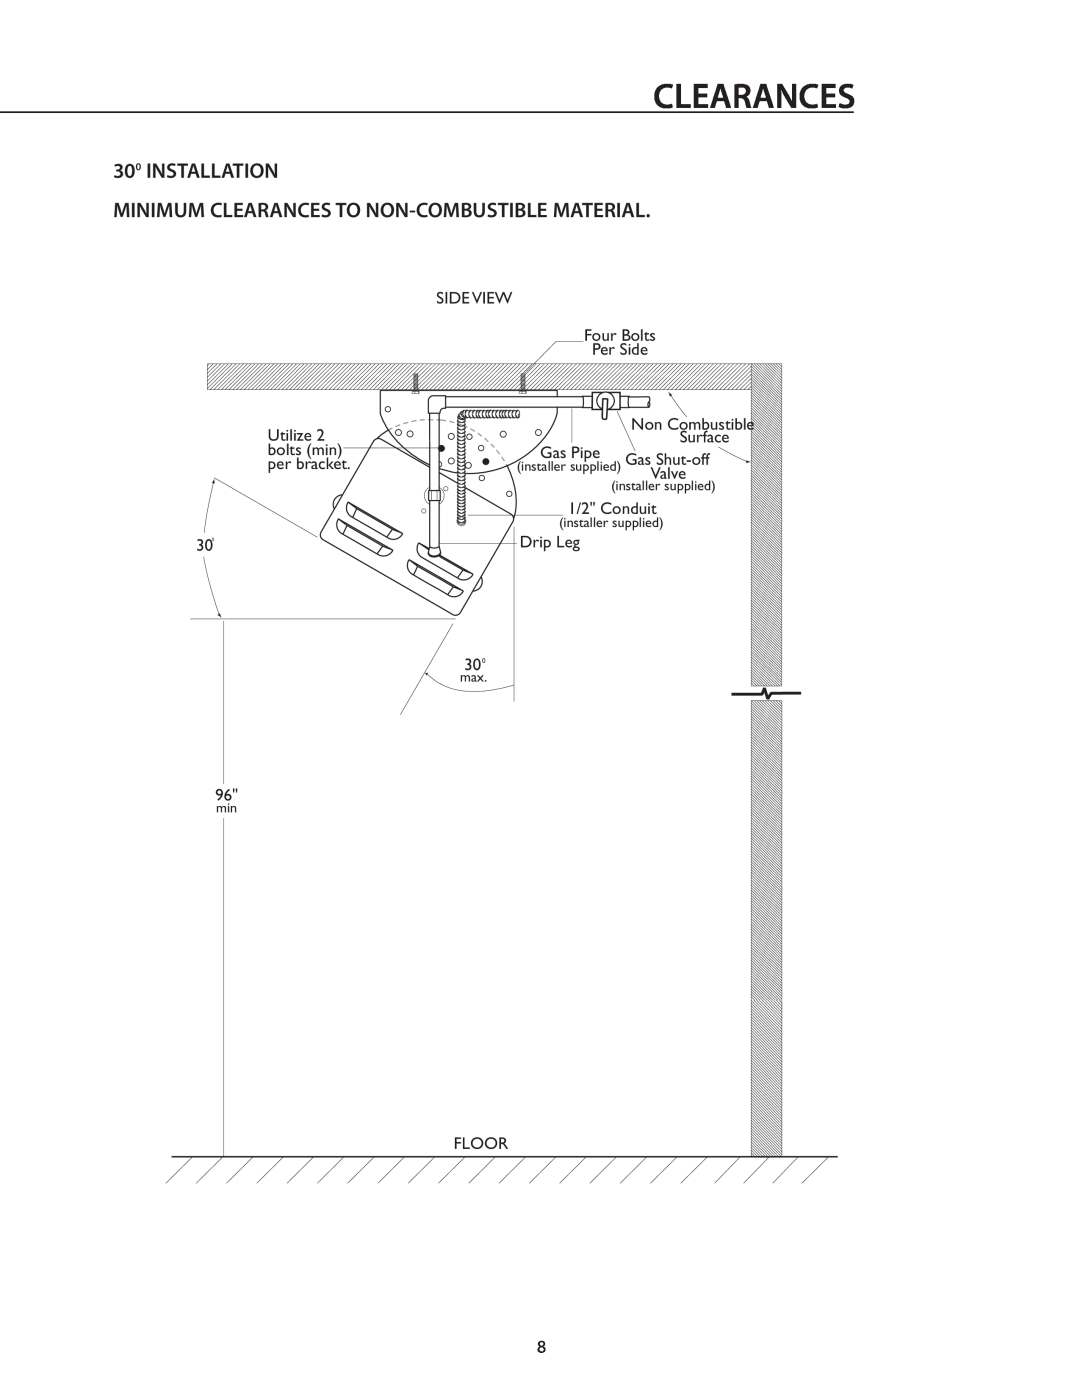 DCS DRH48N installation instructions Installation, Minimum Clearances To Non-Combustiblematerial 